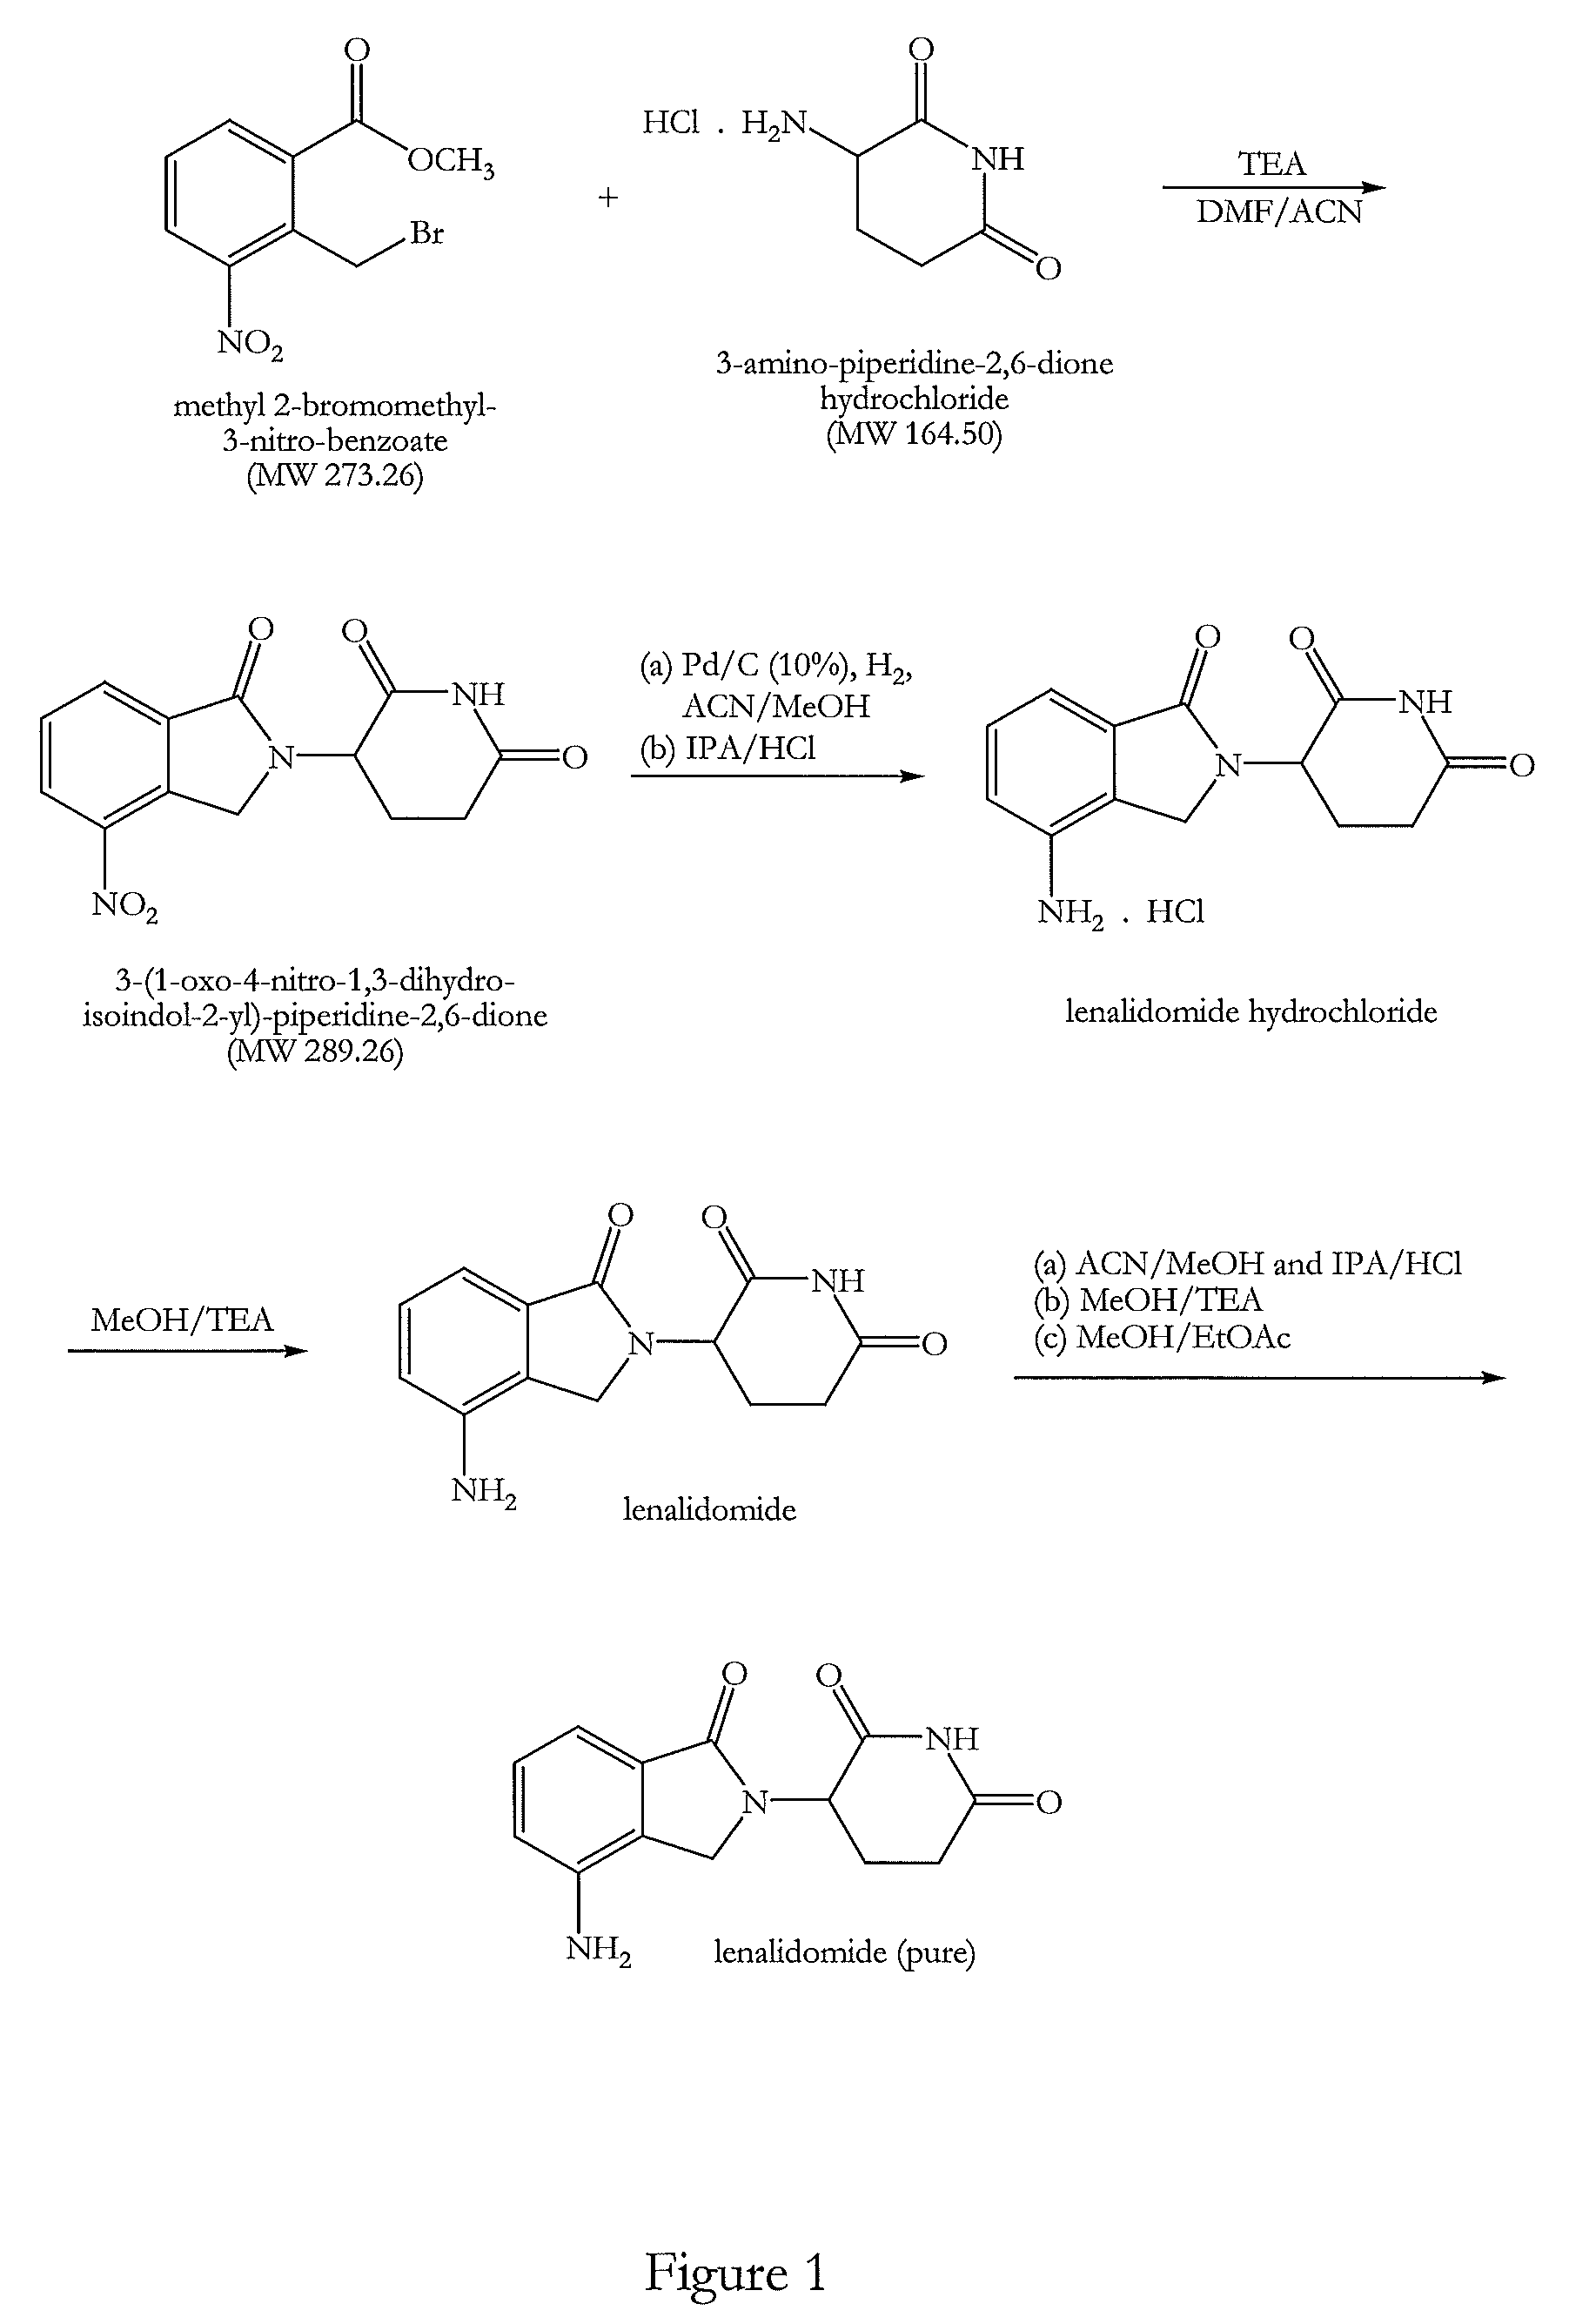 Process for the preparation of lenalidomide